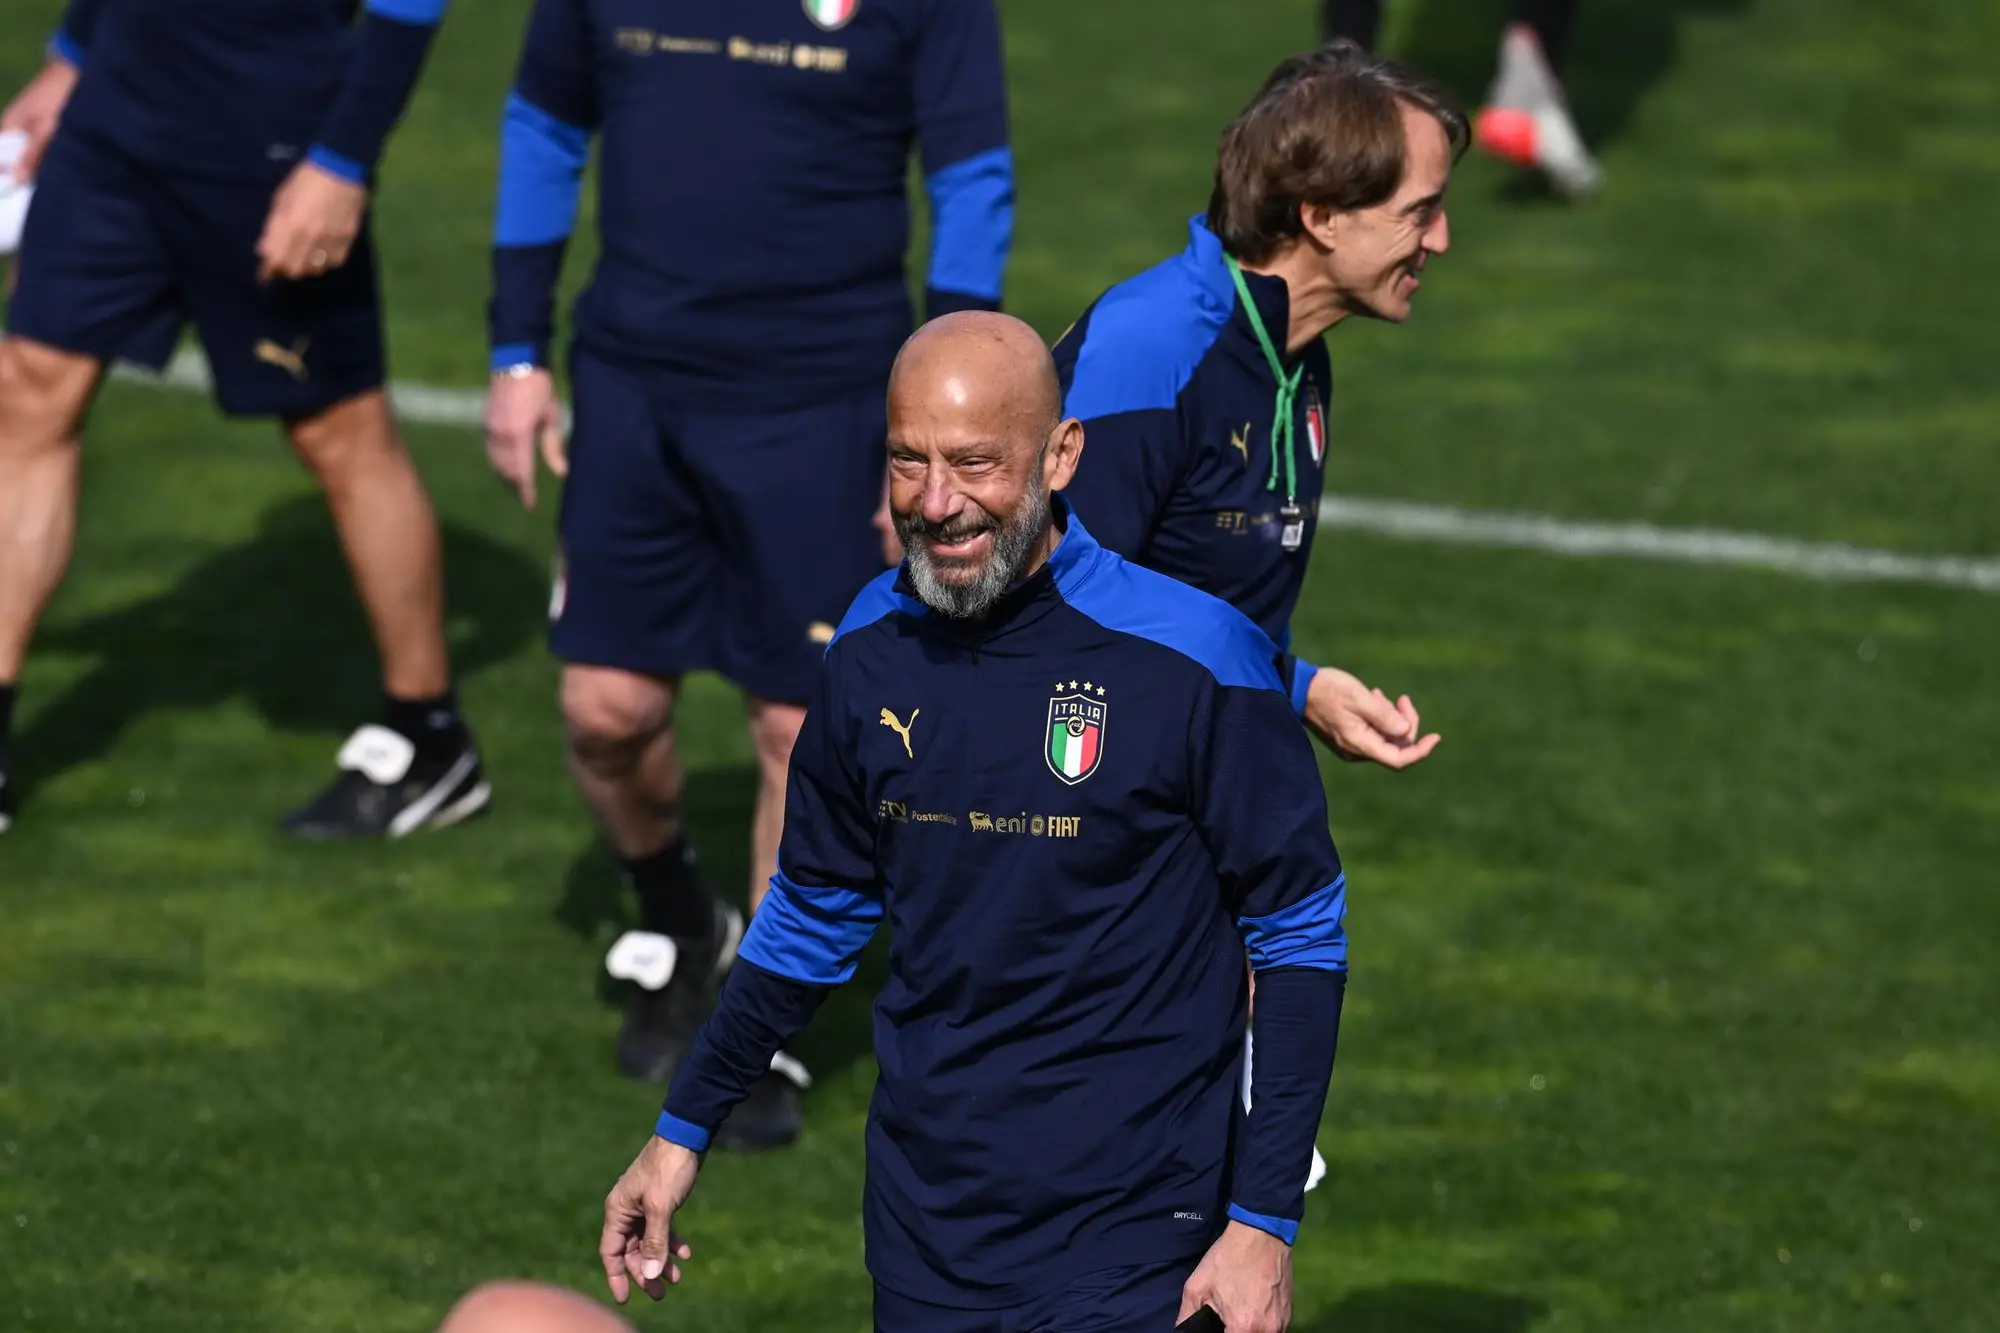 FLORENCE, ITALY - MARCH 28: Gianluca Vialli, Delegation Chief of Italy, smiles during a Italy training session at Centro Tecnico Federale di Coverciano on March 28, 2022 in Florence, Italy. (Photo by Claudio Villa/Getty Images)